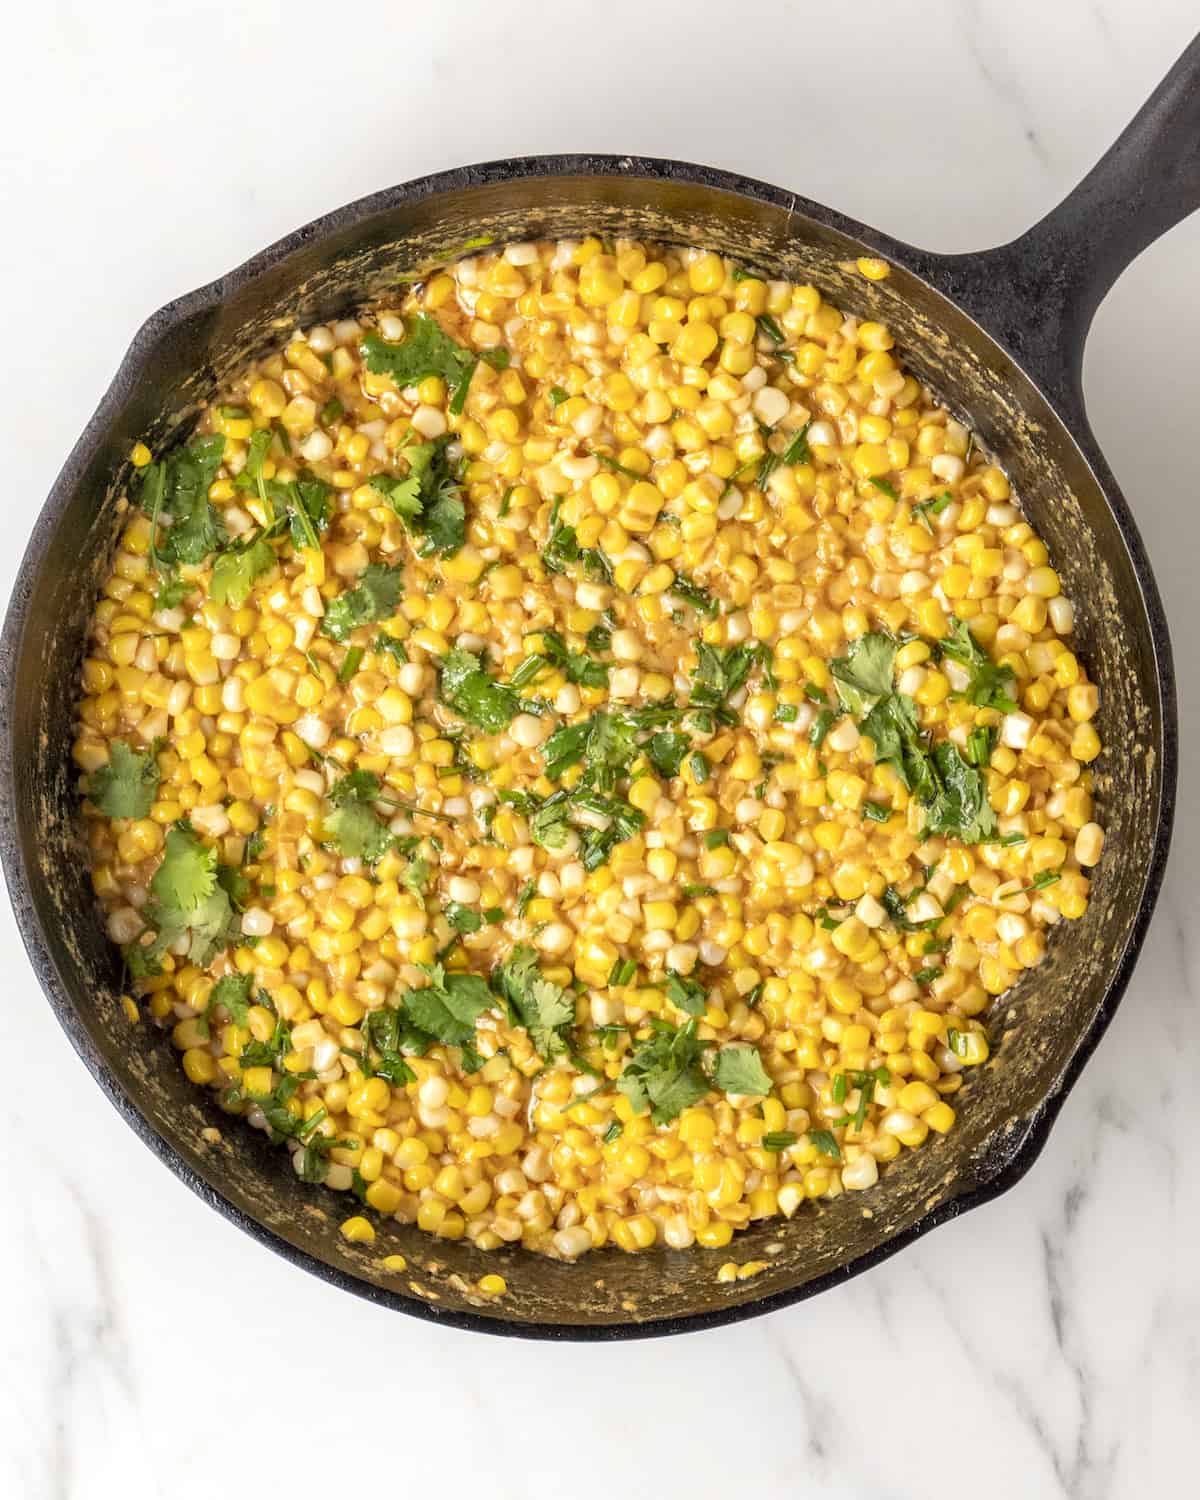 The final dish of cooked corn with all ingredients incorporated into it topped with fresh cilantro and chives.